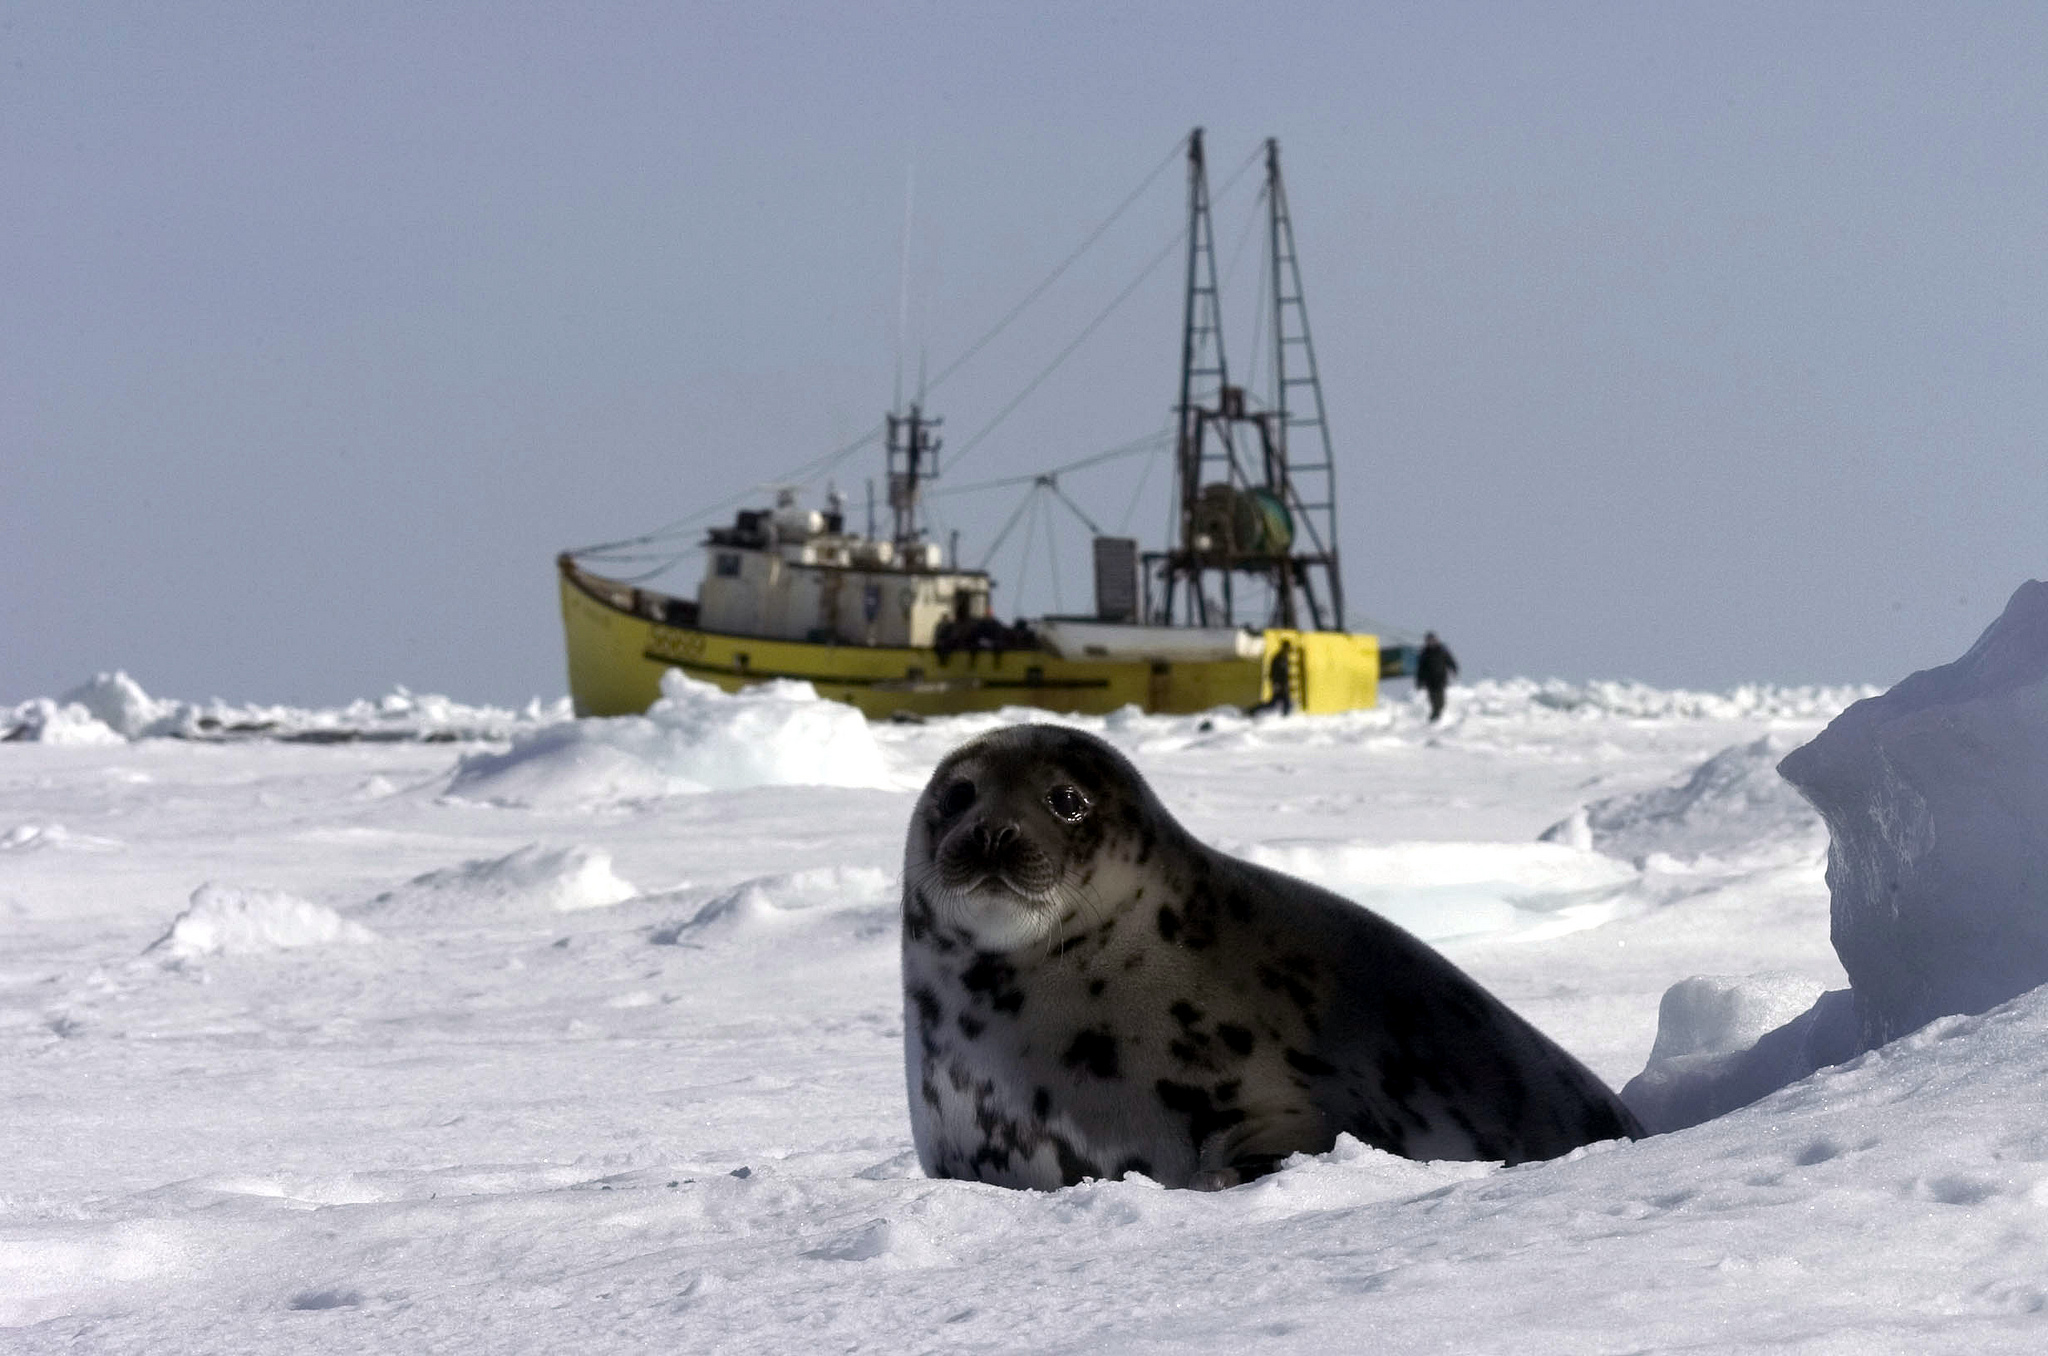 Harp seal in front of sealing boat (photo credit: IFAW, used under CC BY-NC 2.0)